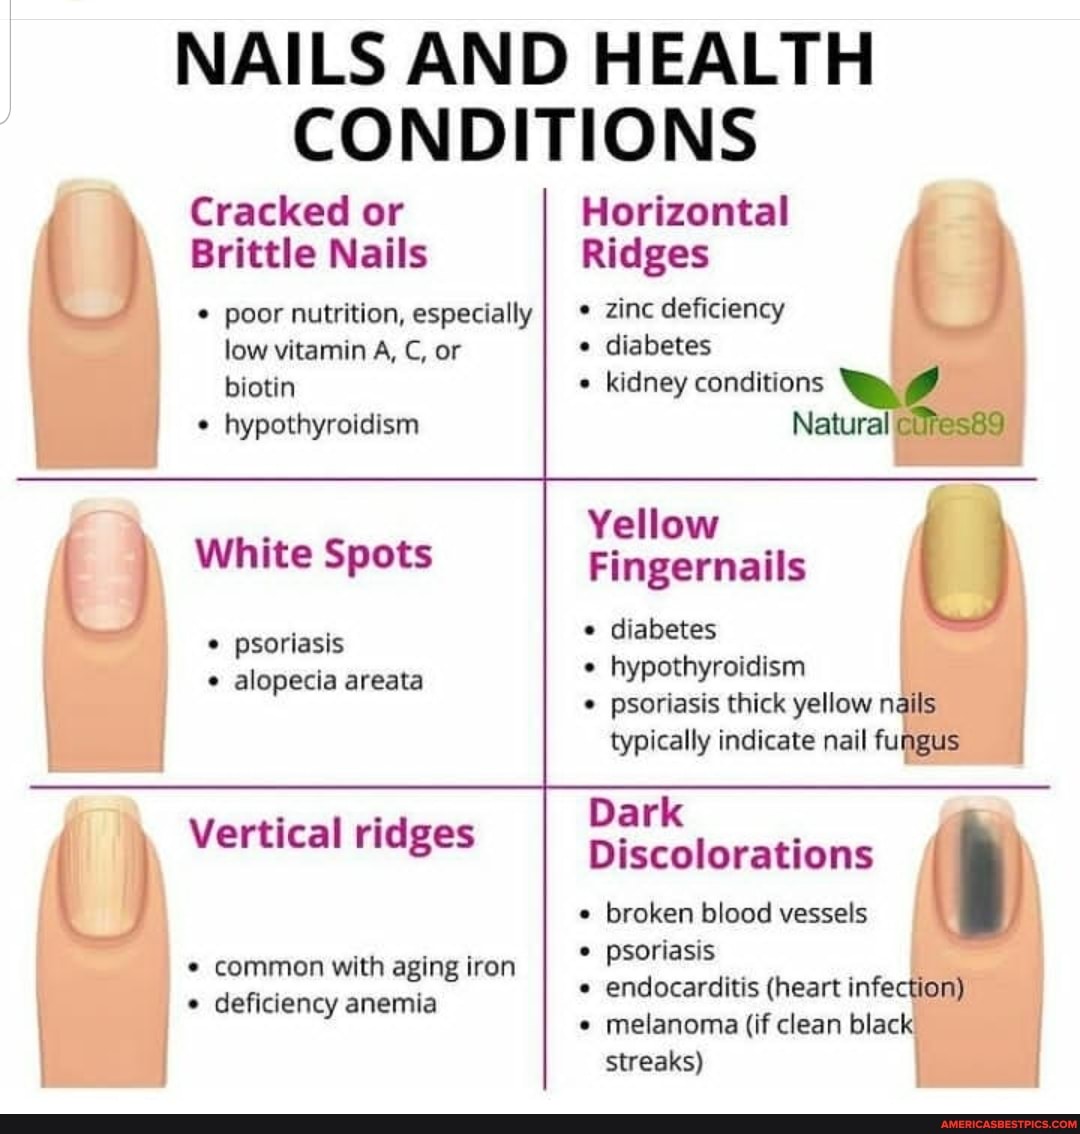 NAILS AND HEALTH CONDITIONS Cracked or Brittle Nails poor nutrition,  especially low vitamin A, C, or